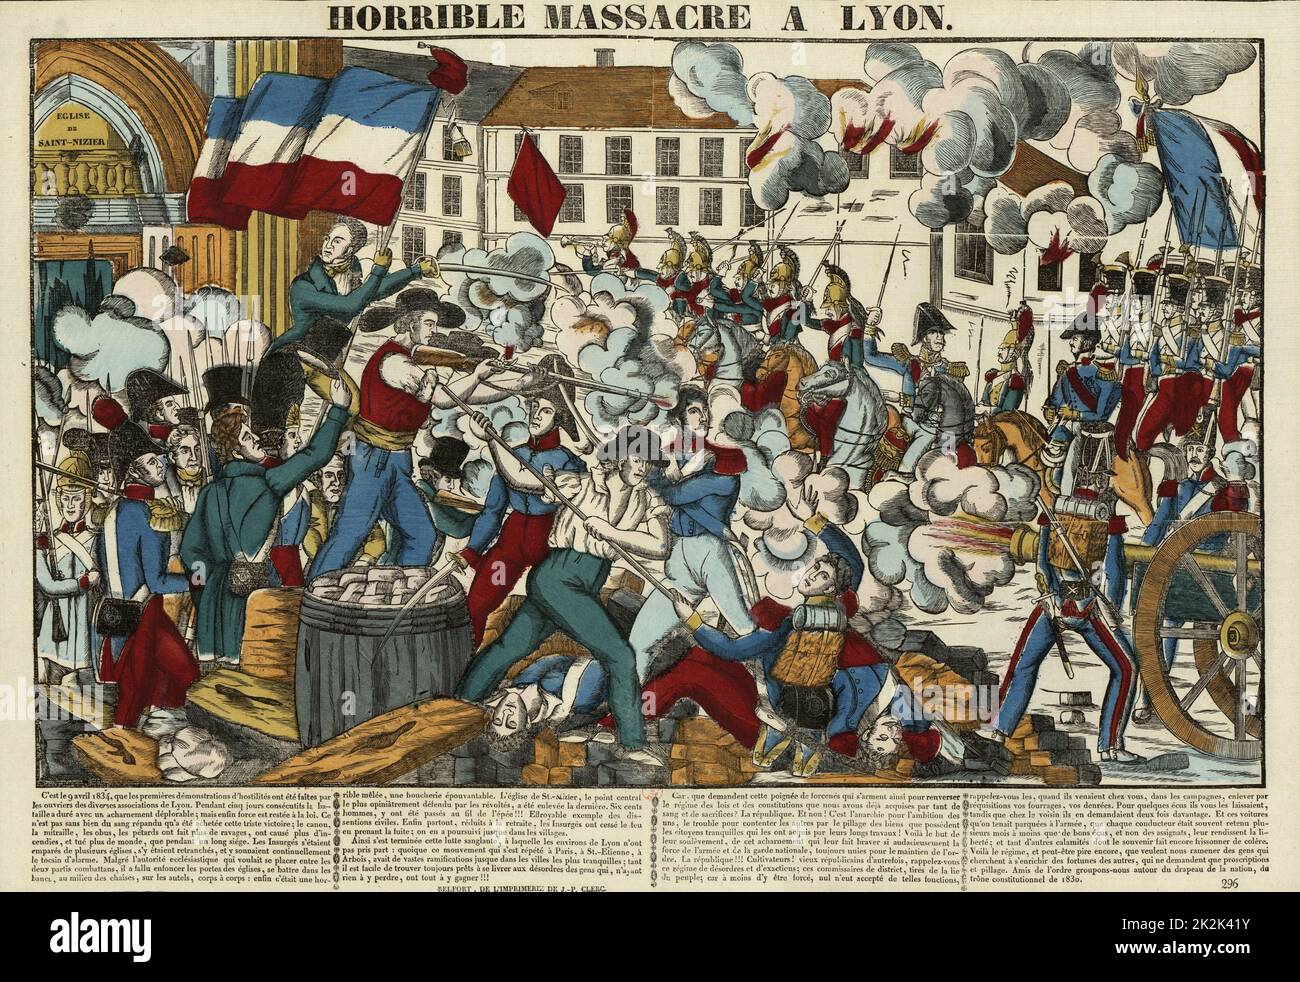 Popular imagery Second revolt of the canuts in Lyon in April 1834. Engraving Private collection Stock Photo